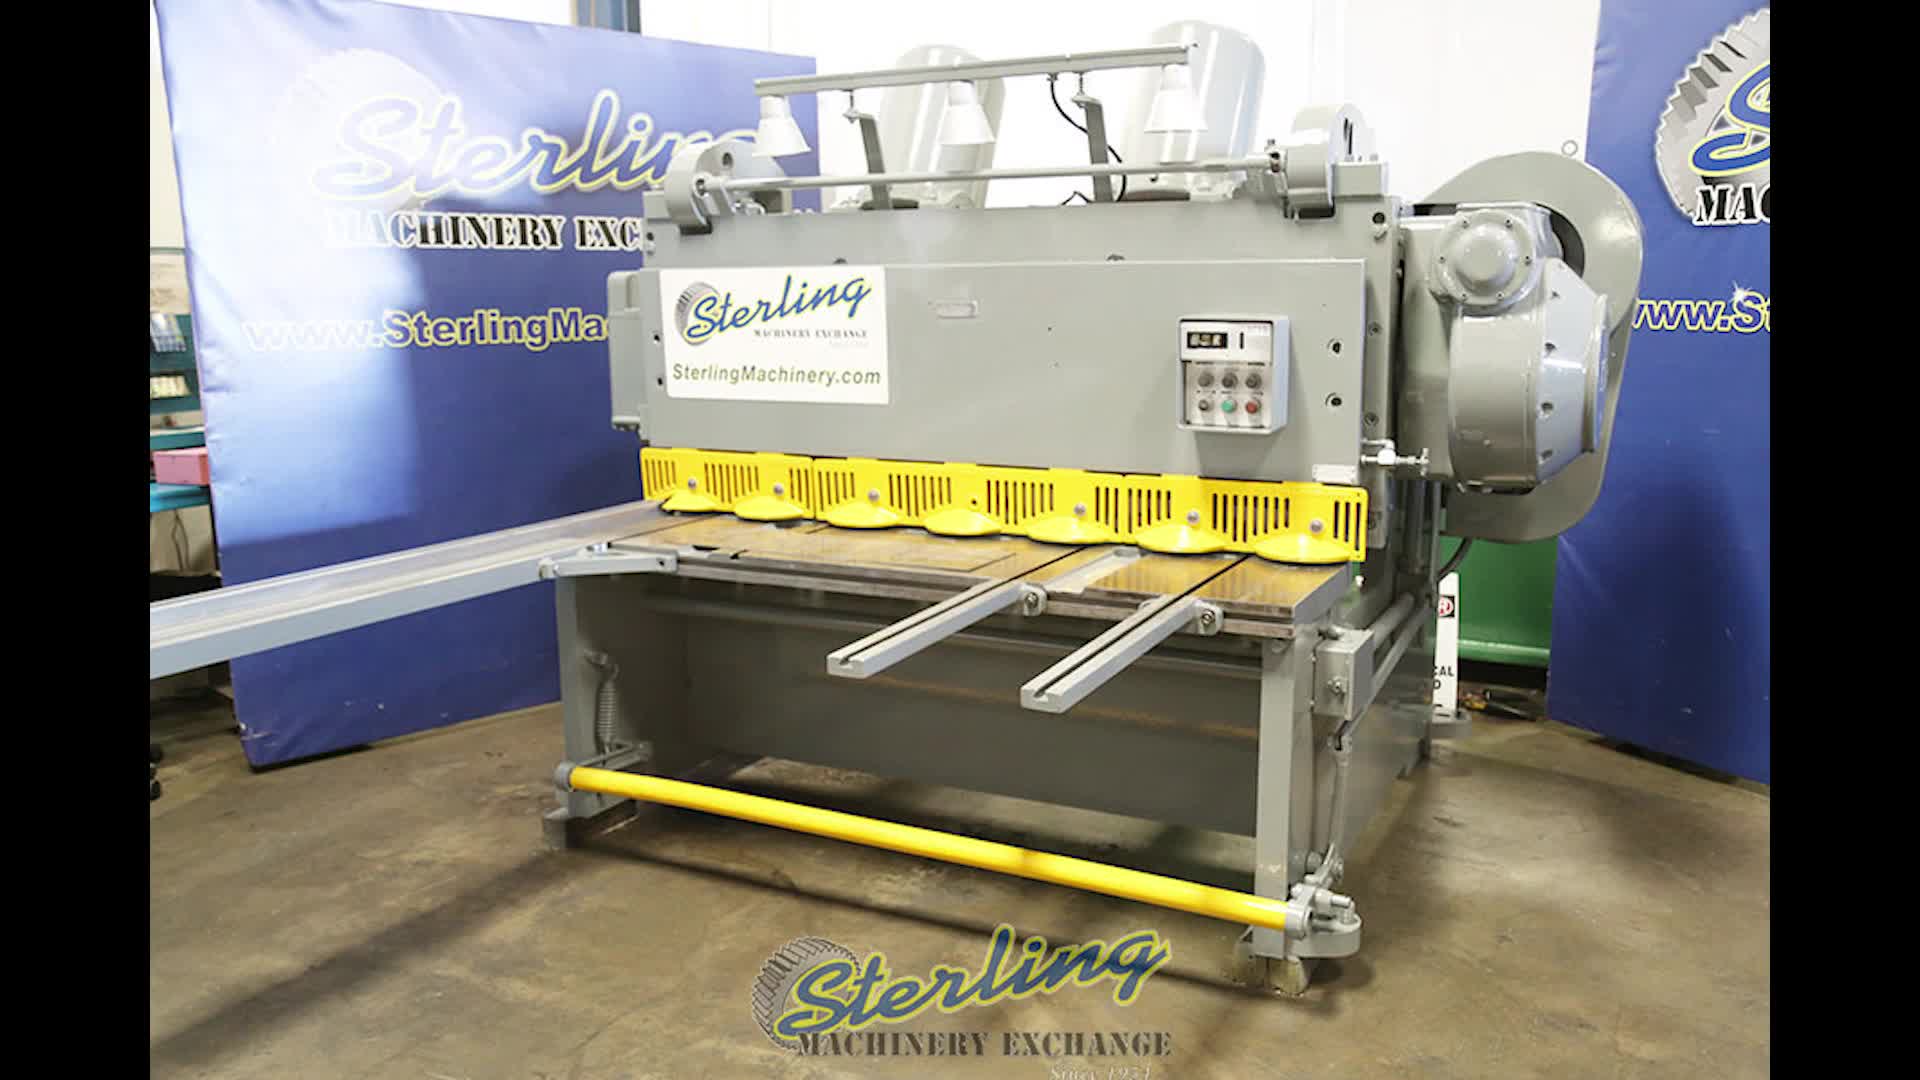 Cincinnati, Inc-3/8" X 6' USED CINCINNATI HEAVY DUTY POWER SHEAR WITH DUAL COUNTER BALANCE, MDL. 2506- R, FRONT OPERATED POWER BACK GAUGE WITH INDICATOR, SQUARE ARM, (2) FRONT SUPPORTS, DUAL COUNTER BALANCE, AUTO LUBE SYSTEM, OVERHEAD SHEAR LINE LIGHT, #9719-01